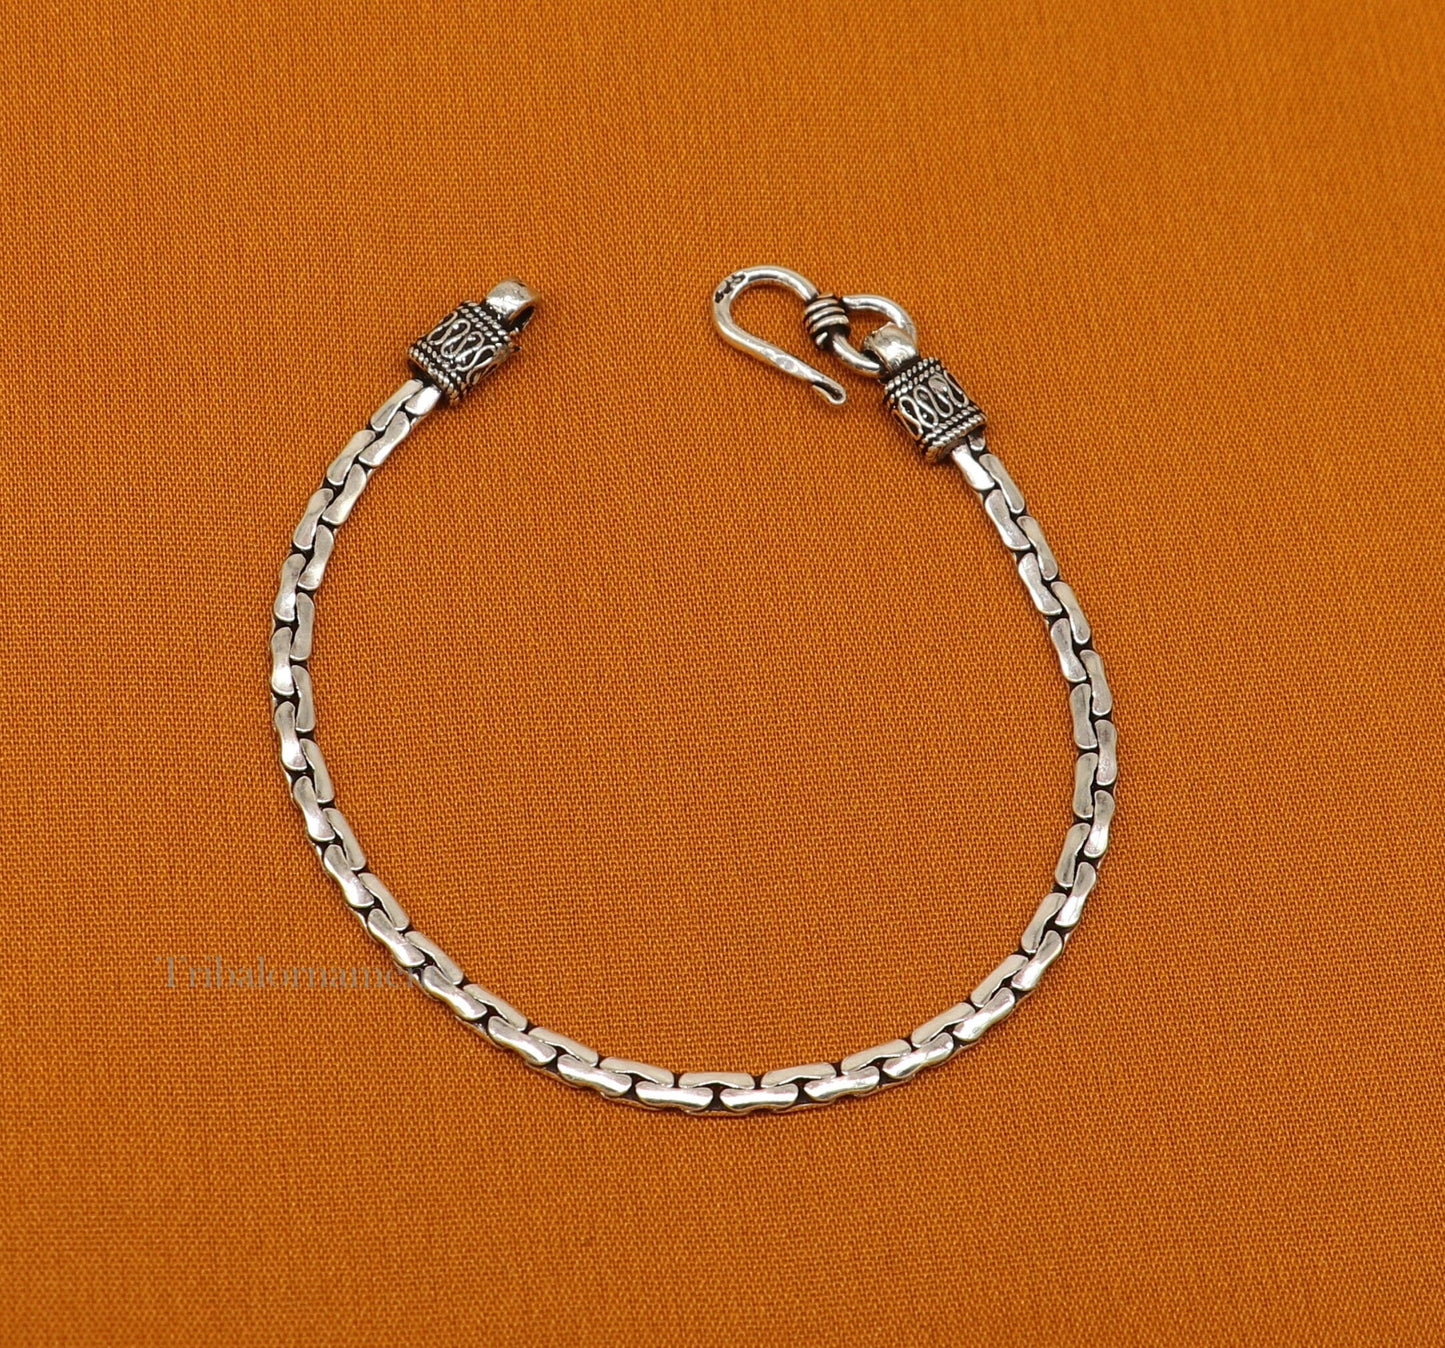 925 sterling silver 6.5 inches customized vintage design girl's jewelry bracelet from india, best light weight gift from india nsbr353 - TRIBAL ORNAMENTS